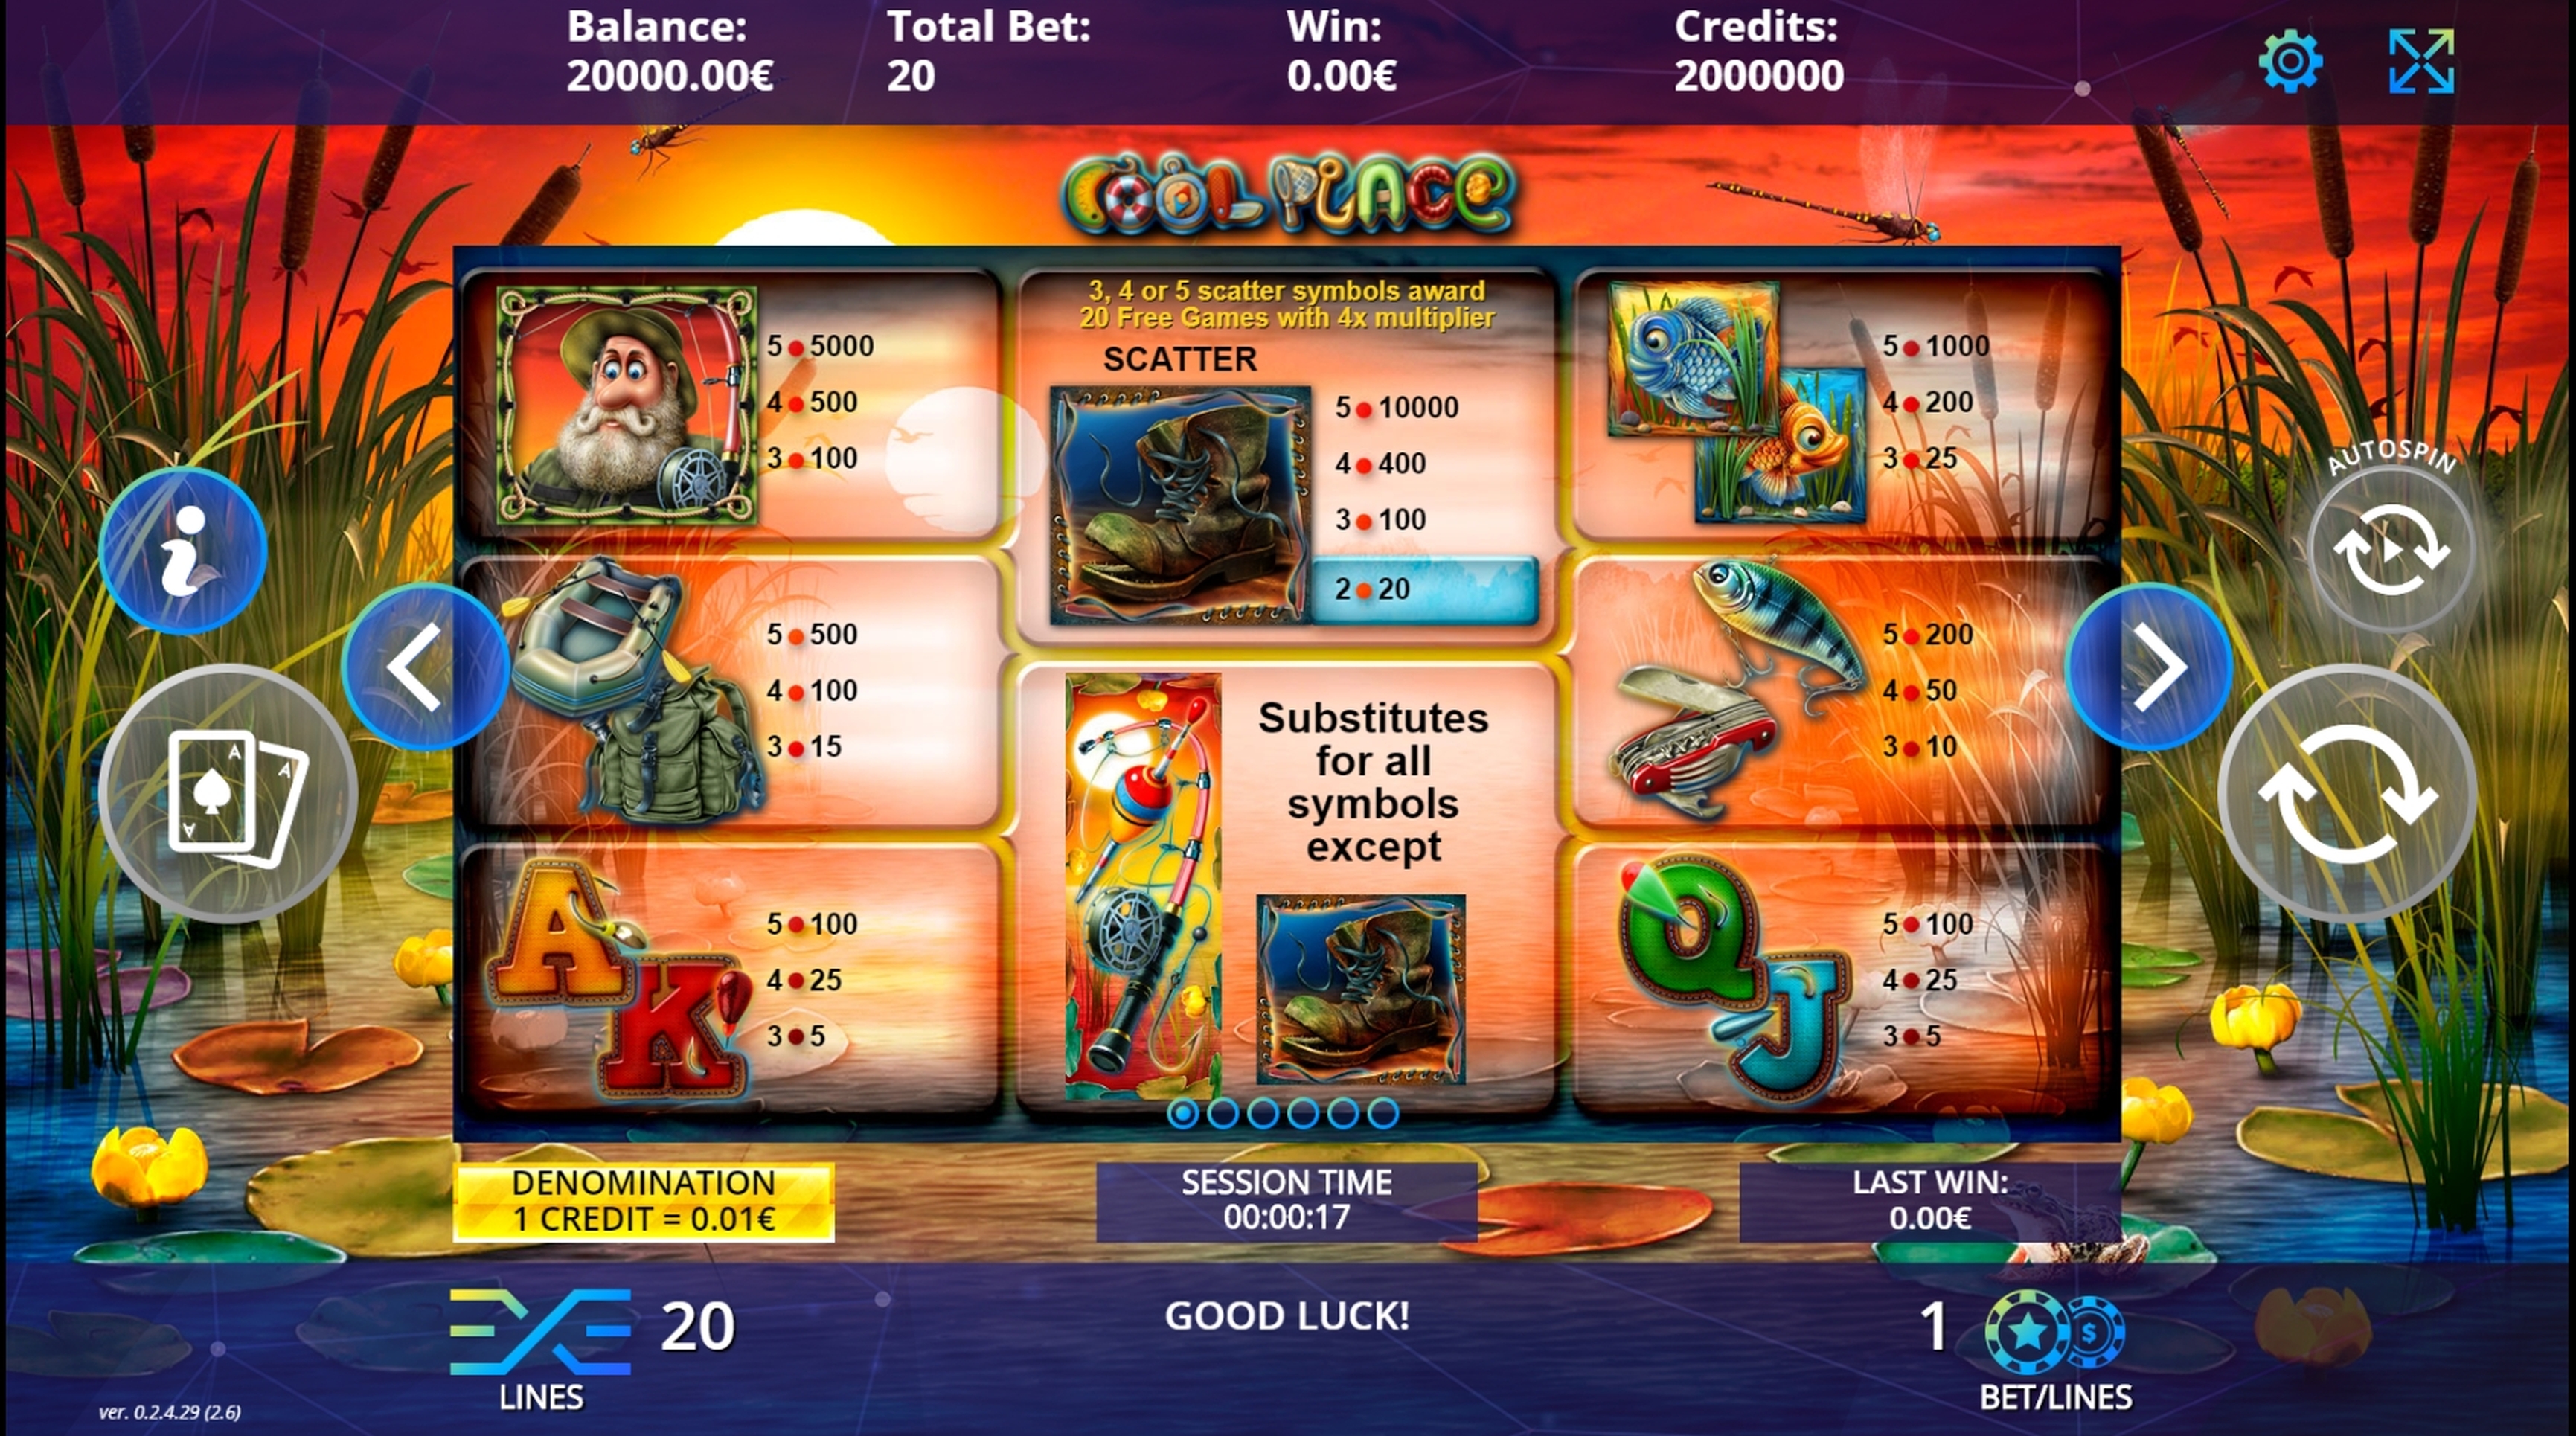 Info of Cool Place Slot Game by DLV